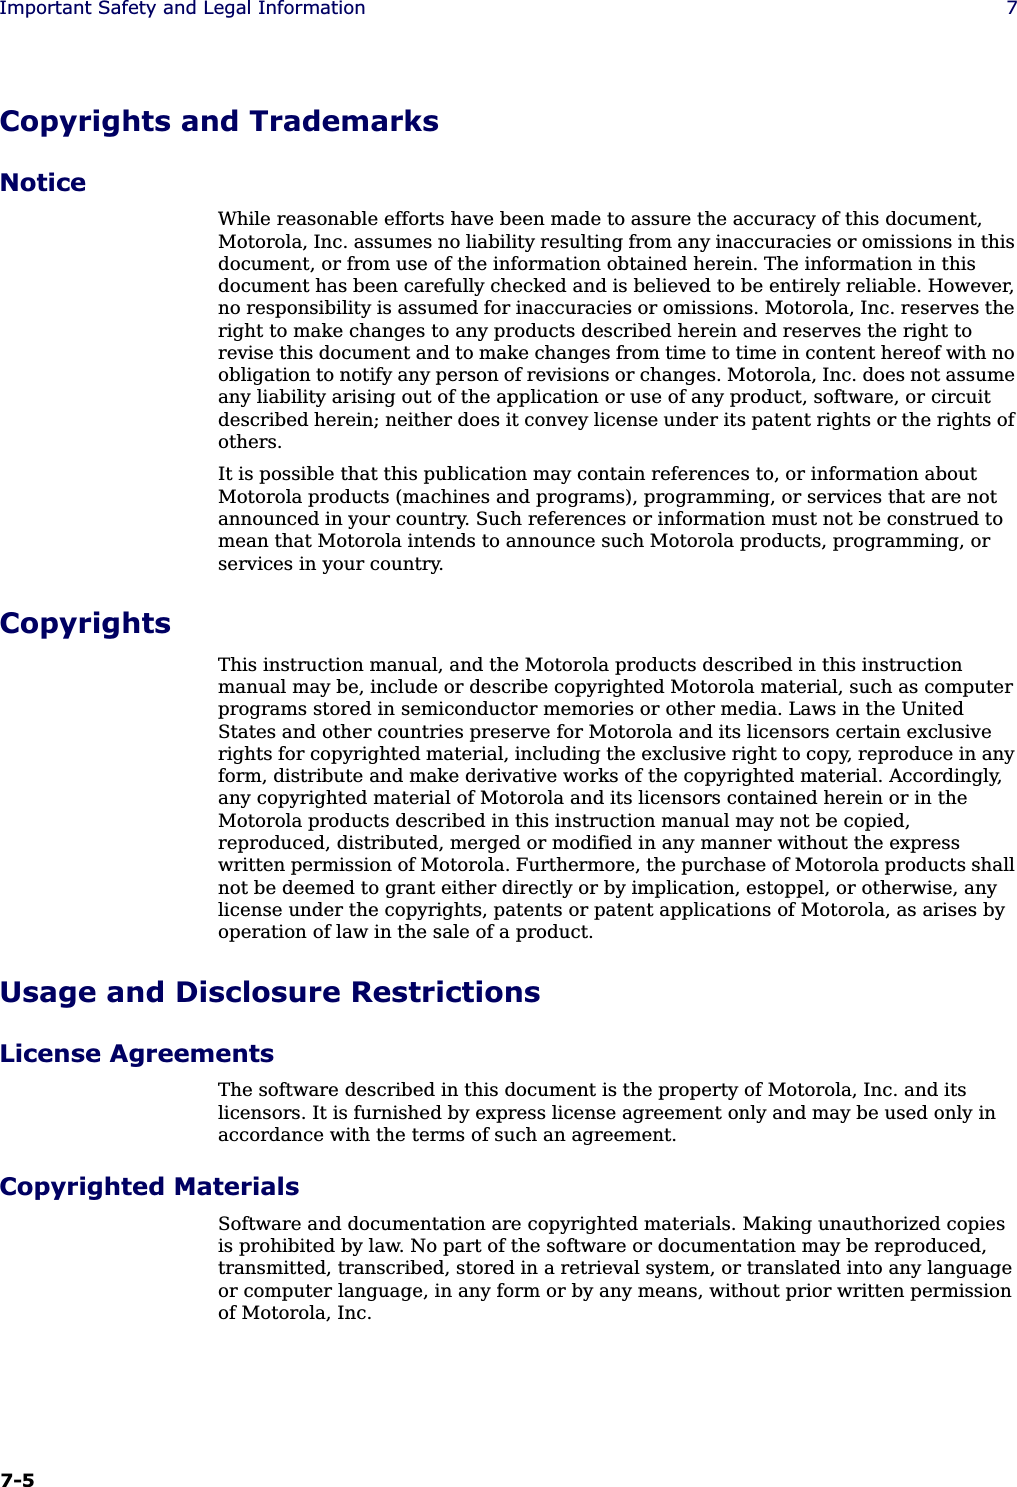 7-5Important Safety and Legal Information 7Copyrights and TrademarksNoticeWhile reasonable efforts have been made to assure the accuracy of this document, Motorola, Inc. assumes no liability resulting from any inaccuracies or omissions in this document, or from use of the information obtained herein. The information in this document has been carefully checked and is believed to be entirely reliable. However, no responsibility is assumed for inaccuracies or omissions. Motorola, Inc. reserves the right to make changes to any products described herein and reserves the right to revise this document and to make changes from time to time in content hereof with no obligation to notify any person of revisions or changes. Motorola, Inc. does not assume any liability arising out of the application or use of any product, software, or circuit described herein; neither does it convey license under its patent rights or the rights of others.It is possible that this publication may contain references to, or information about Motorola products (machines and programs), programming, or services that are not announced in your country. Such references or information must not be construed to mean that Motorola intends to announce such Motorola products, programming, or services in your country.CopyrightsThis instruction manual, and the Motorola products described in this instruction manual may be, include or describe copyrighted Motorola material, such as computer programs stored in semiconductor memories or other media. Laws in the United States and other countries preserve for Motorola and its licensors certain exclusive rights for copyrighted material, including the exclusive right to copy, reproduce in any form, distribute and make derivative works of the copyrighted material. Accordingly, any copyrighted material of Motorola and its licensors contained herein or in the Motorola products described in this instruction manual may not be copied, reproduced, distributed, merged or modified in any manner without the express written permission of Motorola. Furthermore, the purchase of Motorola products shall not be deemed to grant either directly or by implication, estoppel, or otherwise, any license under the copyrights, patents or patent applications of Motorola, as arises by operation of law in the sale of a product.Usage and Disclosure RestrictionsLicense AgreementsThe software described in this document is the property of Motorola, Inc. and its licensors. It is furnished by express license agreement only and may be used only in accordance with the terms of such an agreement.Copyrighted MaterialsSoftware and documentation are copyrighted materials. Making unauthorized copies is prohibited by law. No part of the software or documentation may be reproduced, transmitted, transcribed, stored in a retrieval system, or translated into any language or computer language, in any form or by any means, without prior written permission of Motorola, Inc.